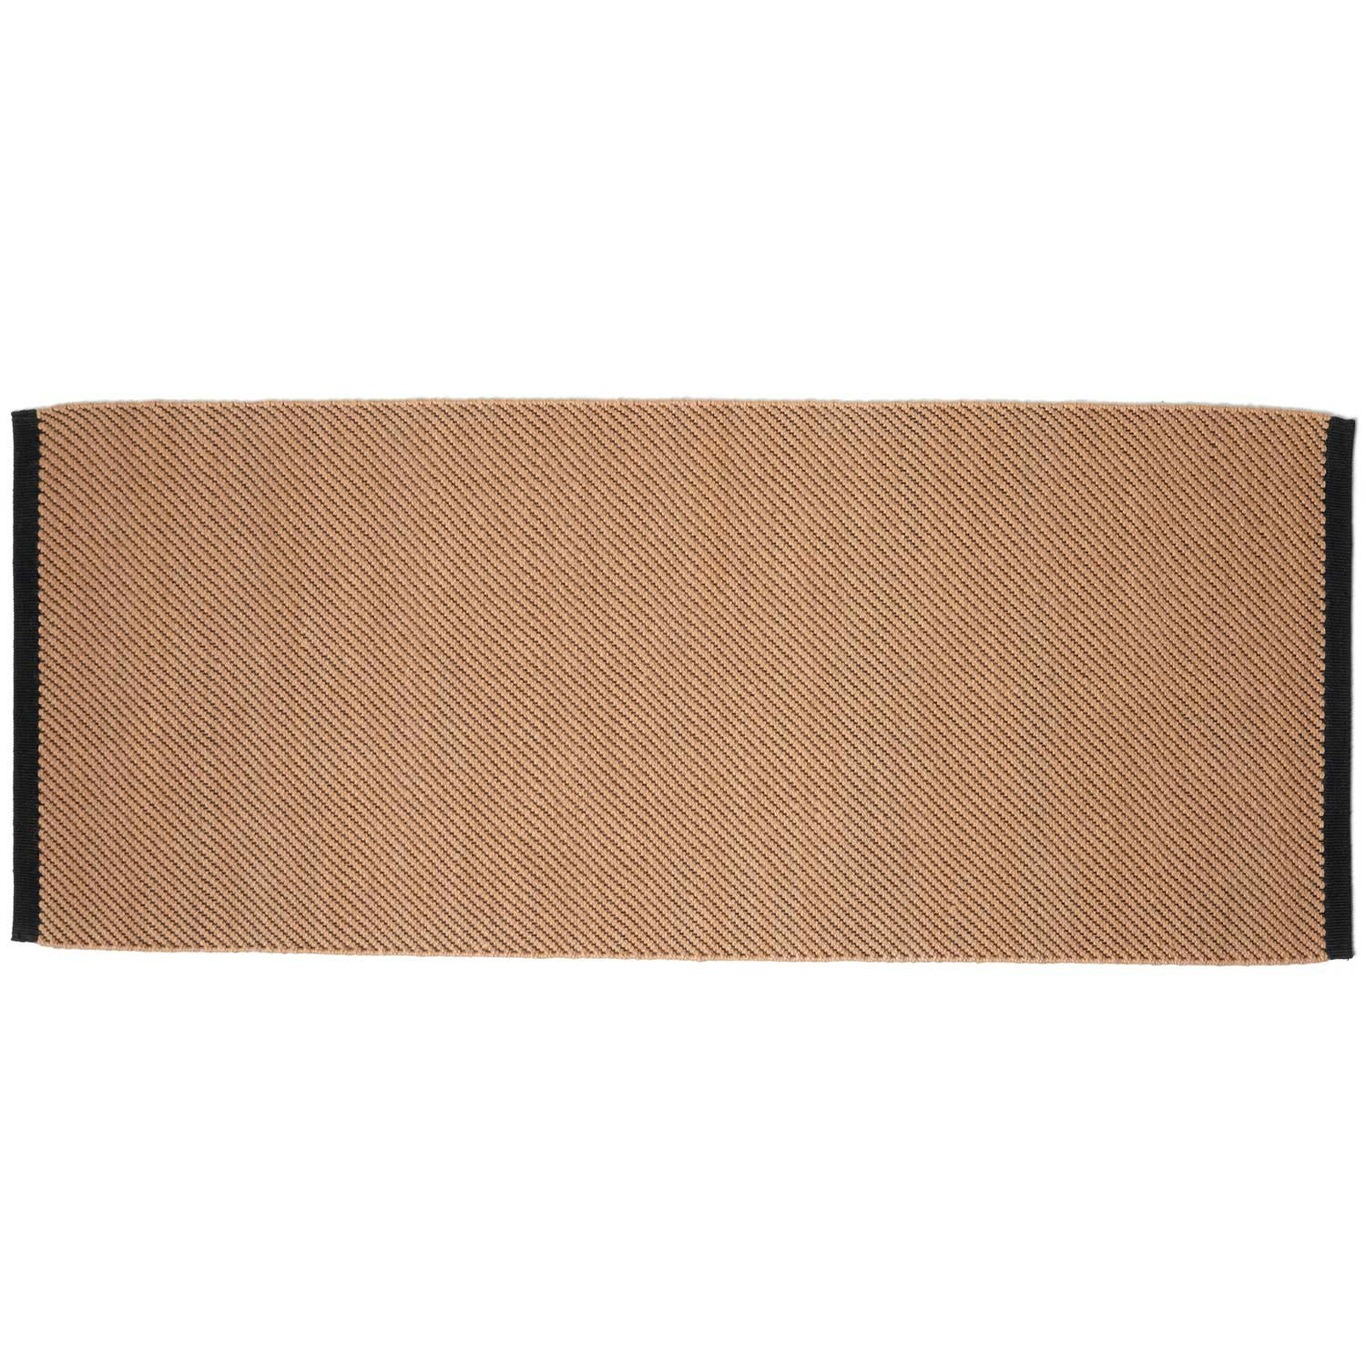 Balcony Seat Cushion For Bench, Beige